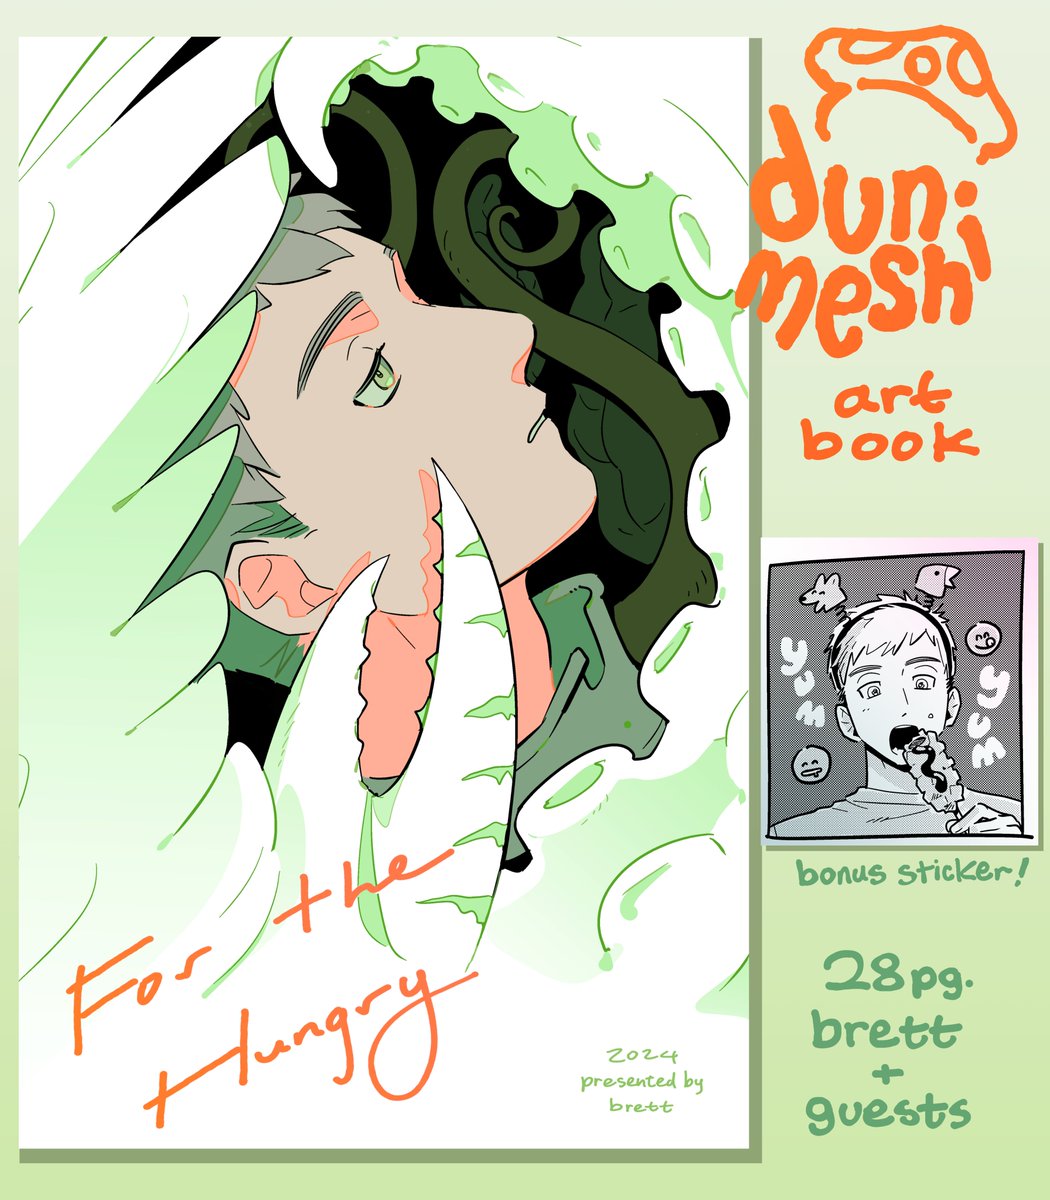 my dunmeshi artbook...🥹🥹
available online and at vancaf this weekend!!! 